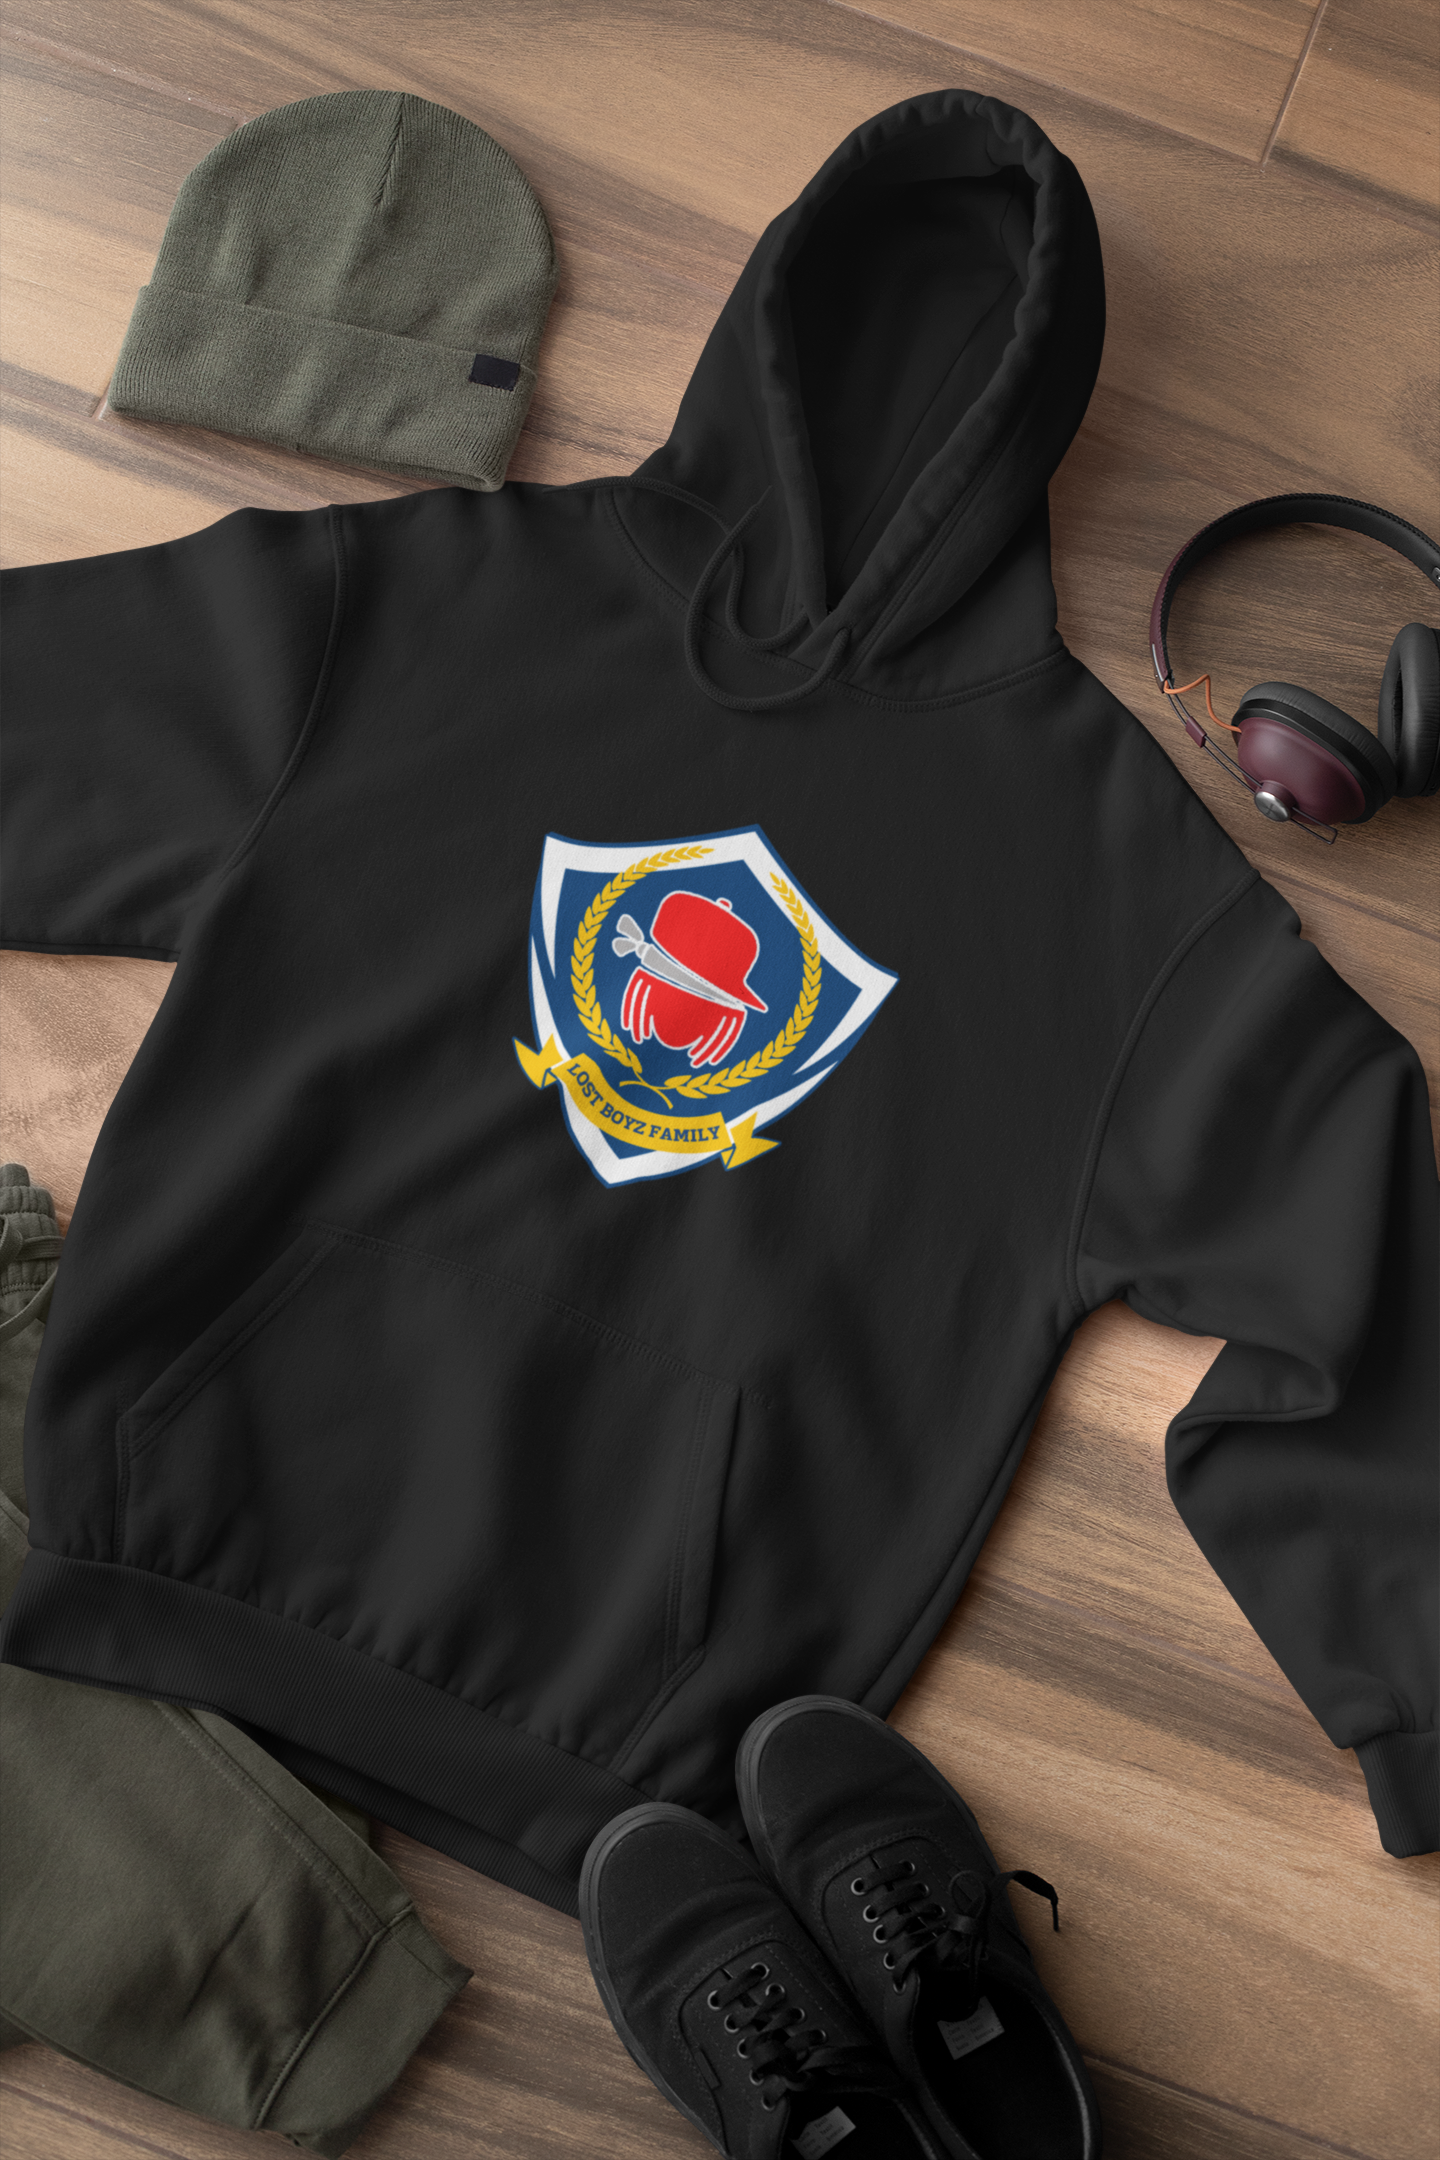 Lost Boyz Family Crest Hoodie (Blue/Gold/Red)